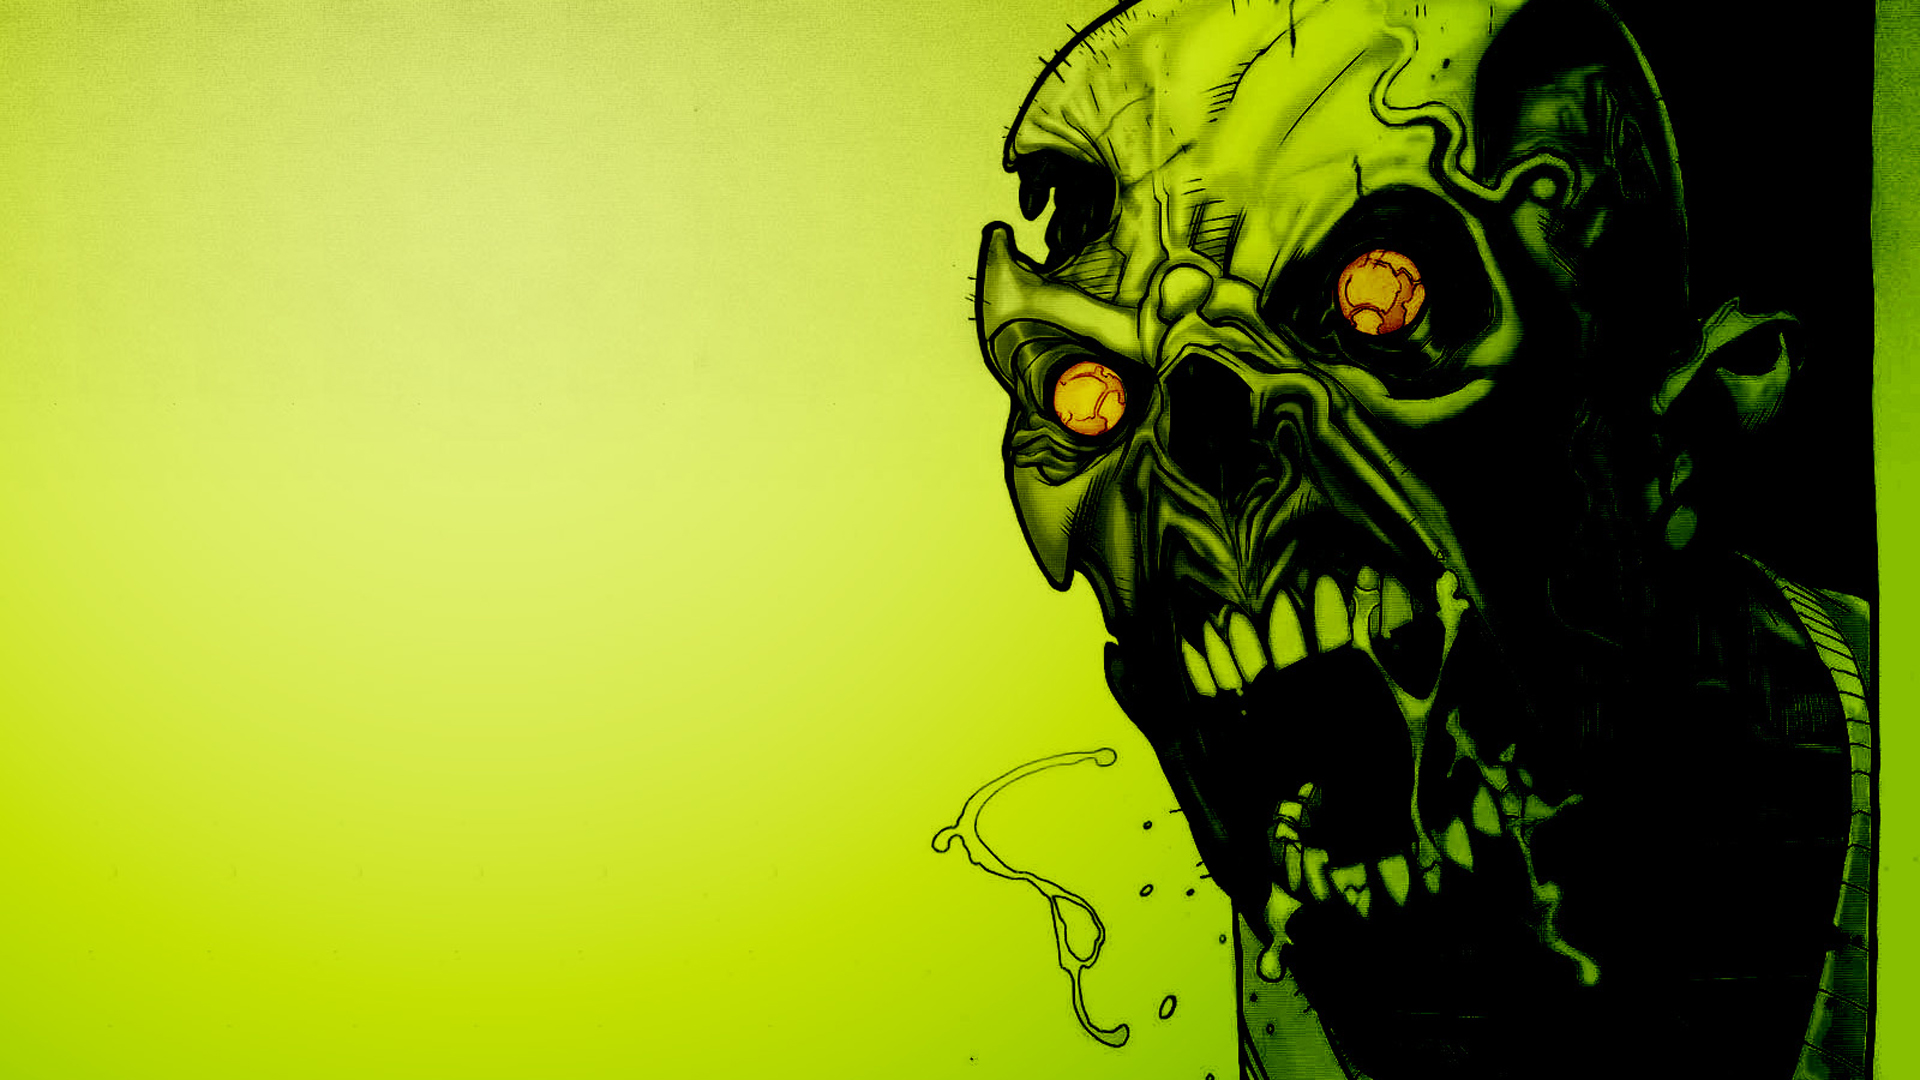 Zombie online game wallpapers hd wallpapers | Chainimage